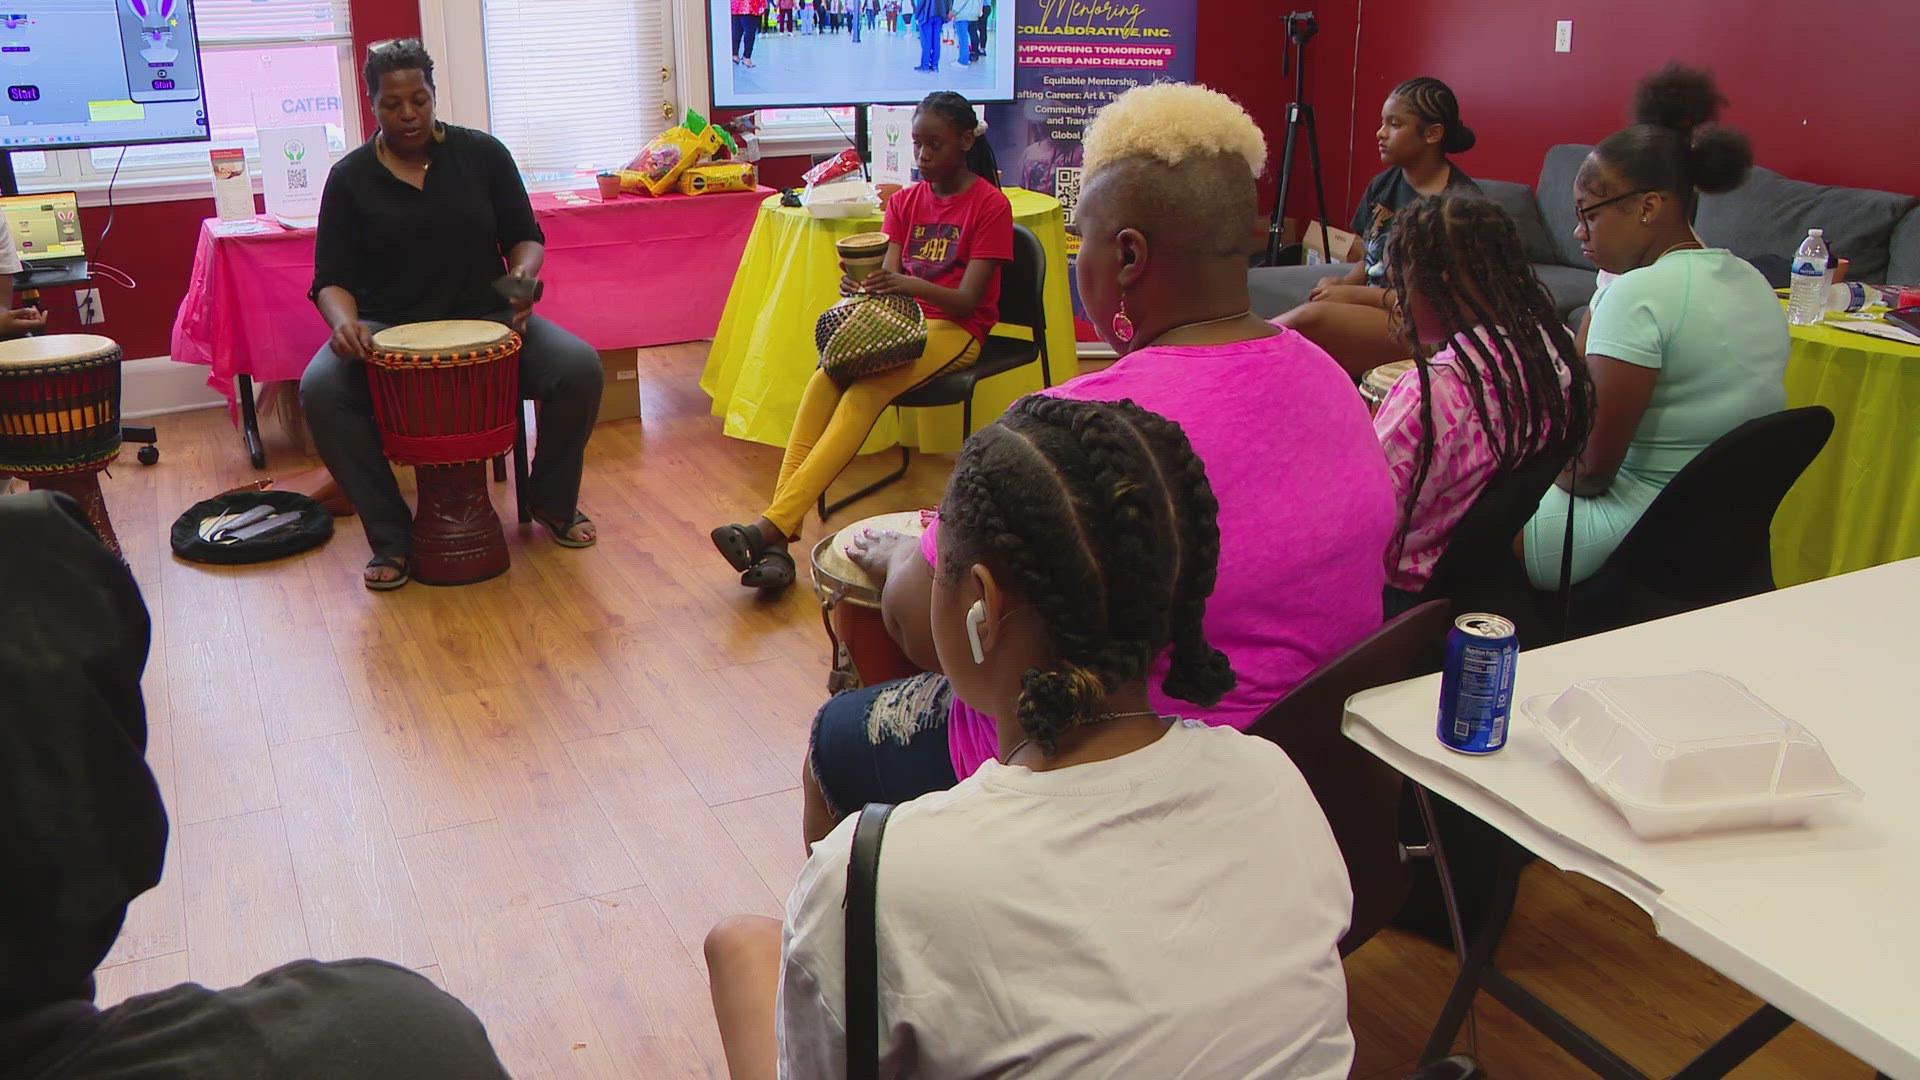 Gun violence victims and others with trauma were taught how to heal through different workshops.